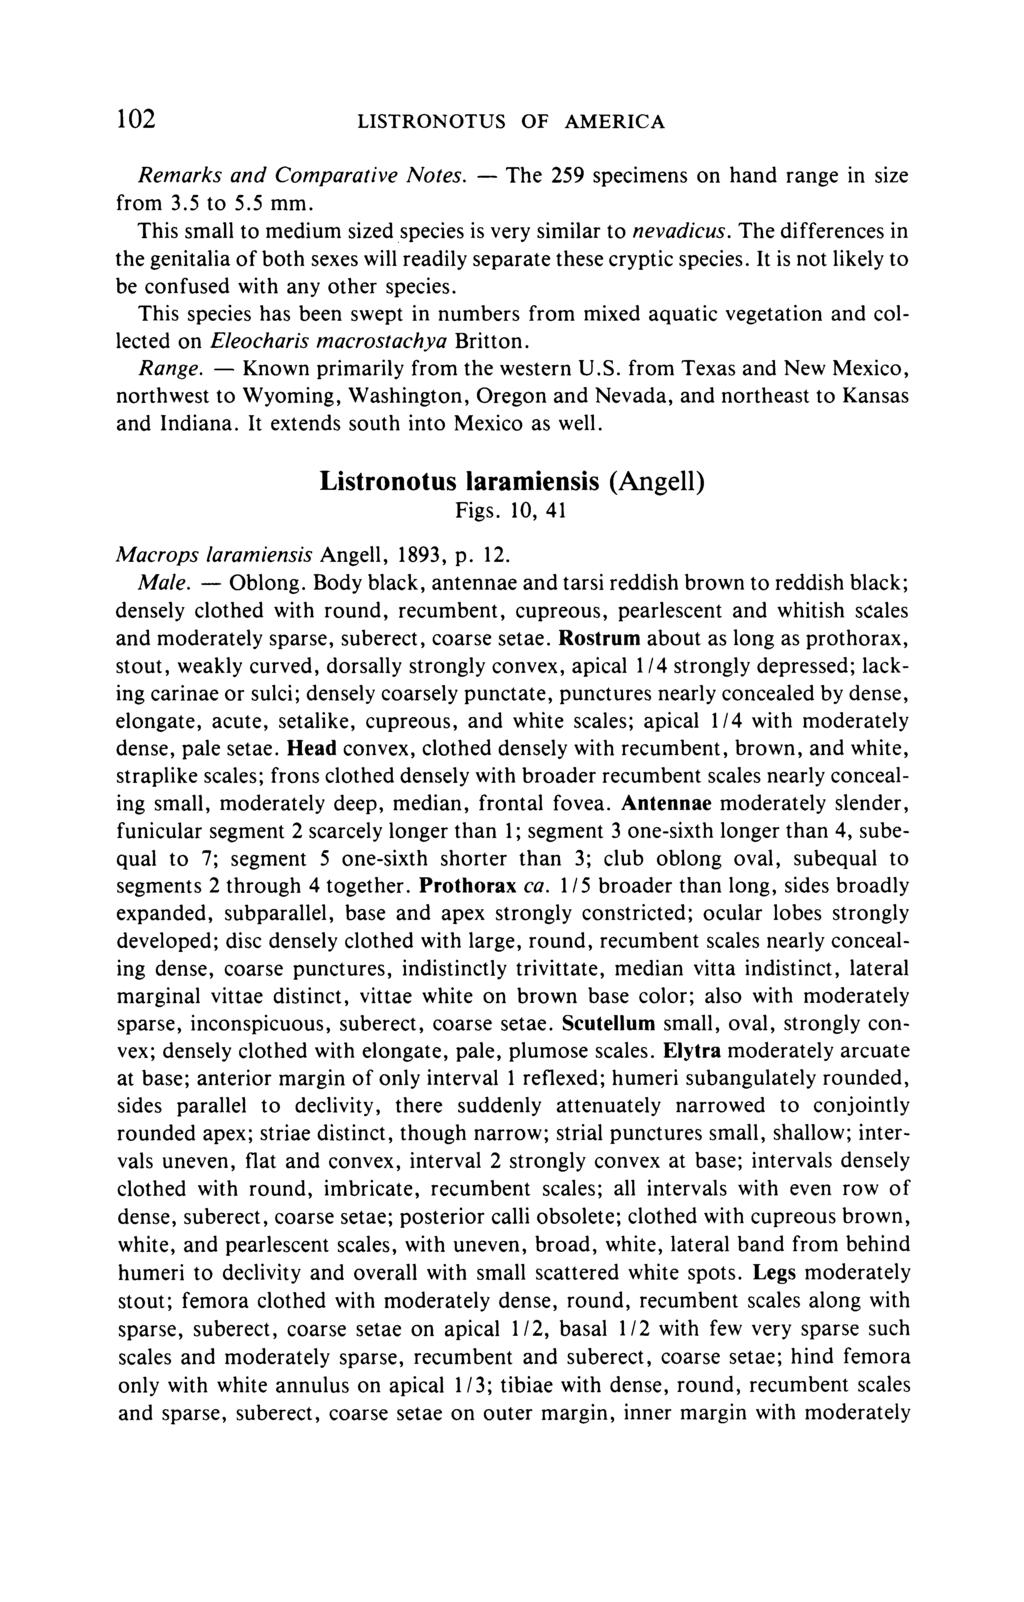 102 LISTRONOTUS OF AMERICA Remarks and Comparative Notes. from 3.5 to 5.5 mm. The 259 specimens on hand range in size This small to medium sized species is very similar to nevadicus.